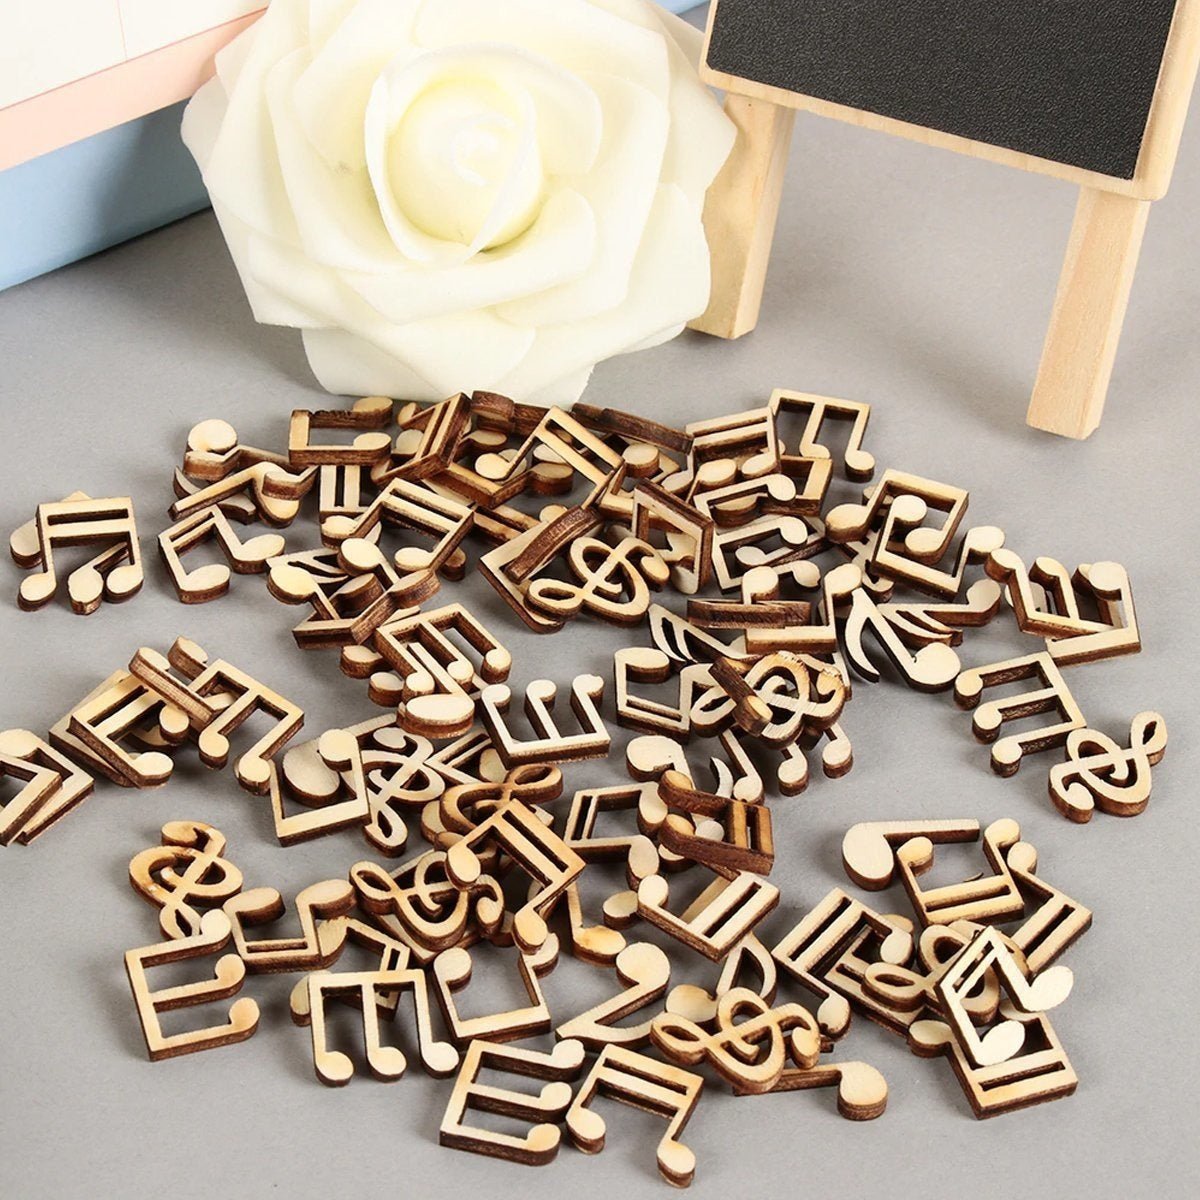 100pcs Wooden Musical Notes Shapes Pieces Mini DIY Crafts Wood Music Note - Asia Sell